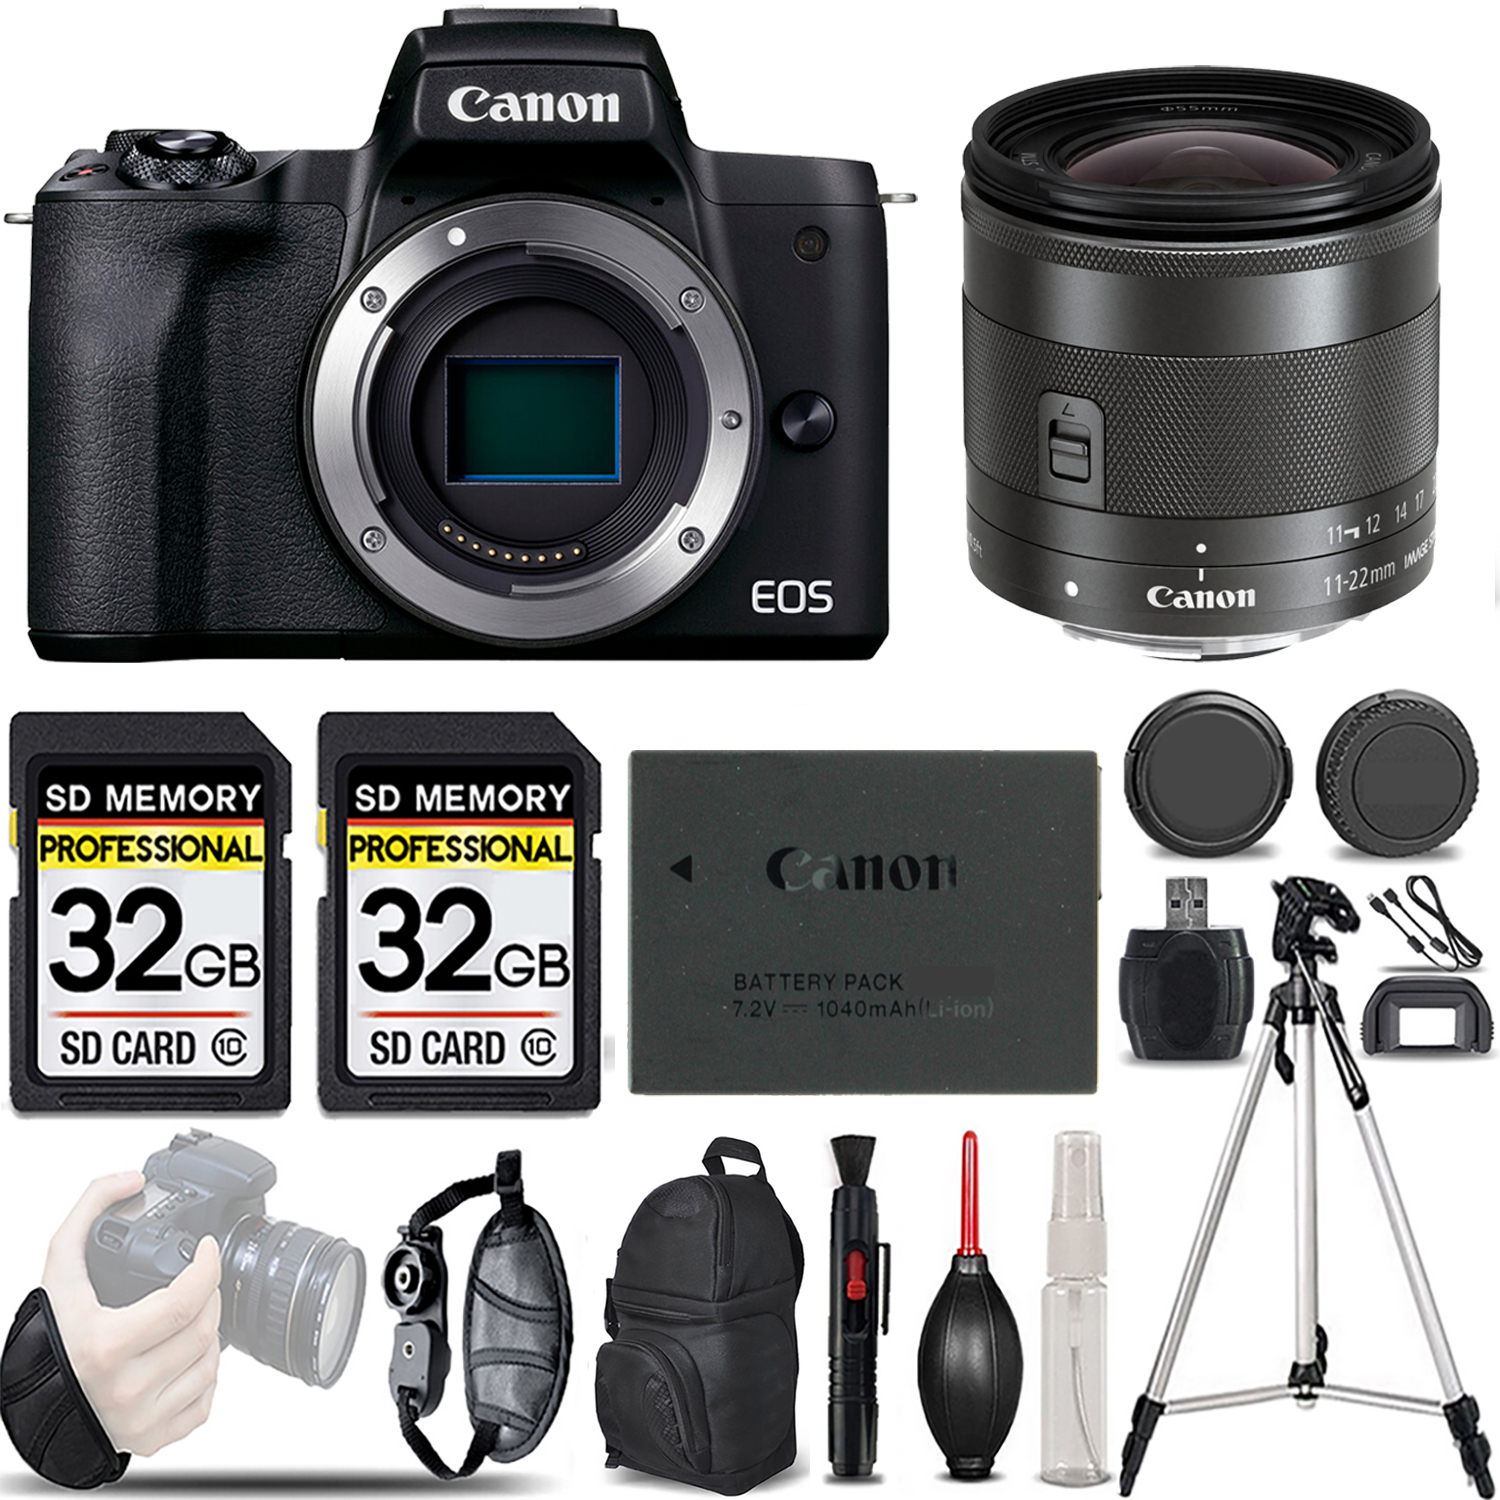 EOS M50 Mark II Camera (Black) + 11-22mm f/4-5.6 IS STM Lens - LOADED KIT *FREE SHIPPING*